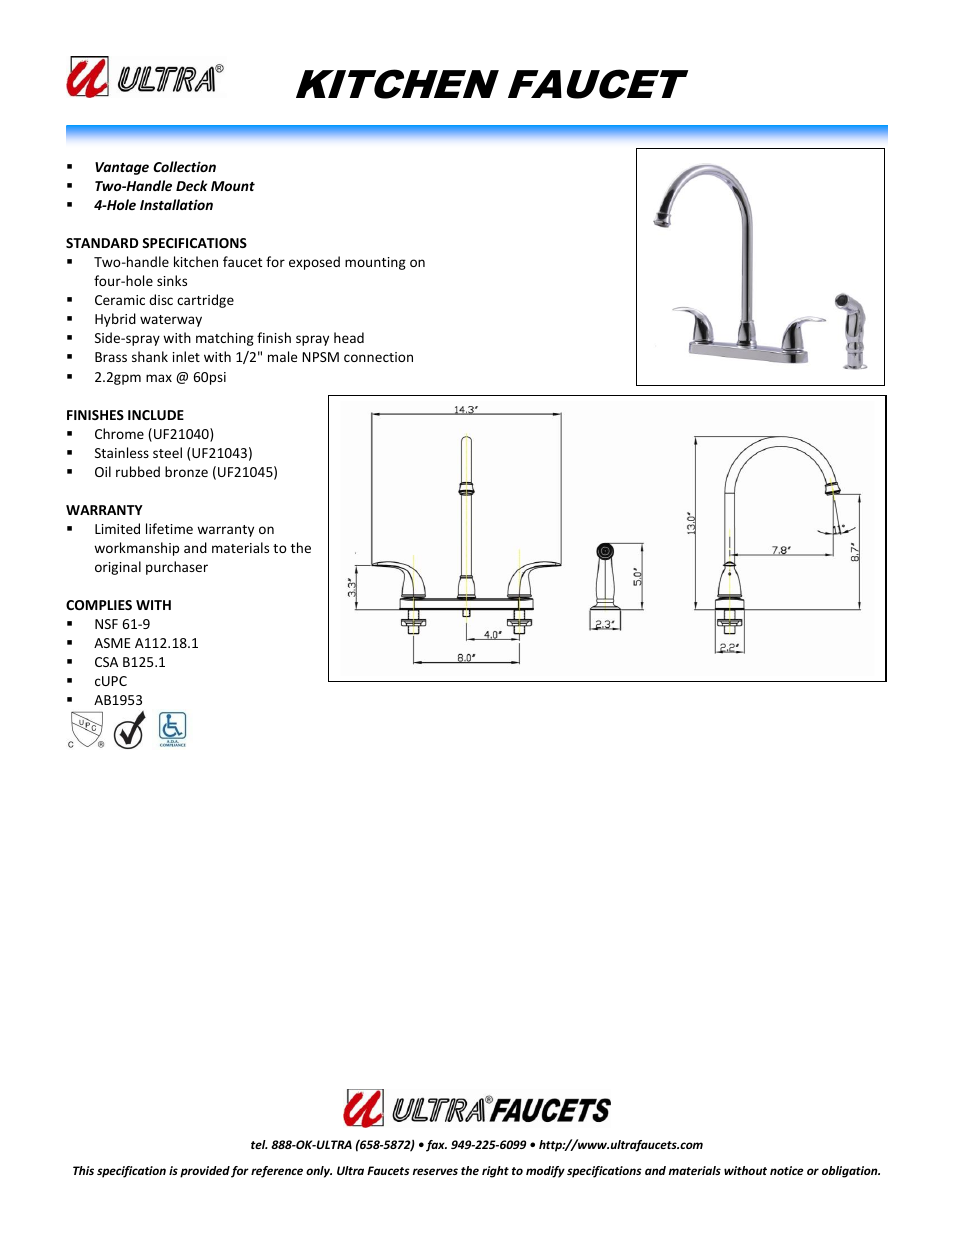 "VANTAGE COLLECTIONTWO-HANDLE KITCHEN FAUCET WITH SIDE-SPRAY"